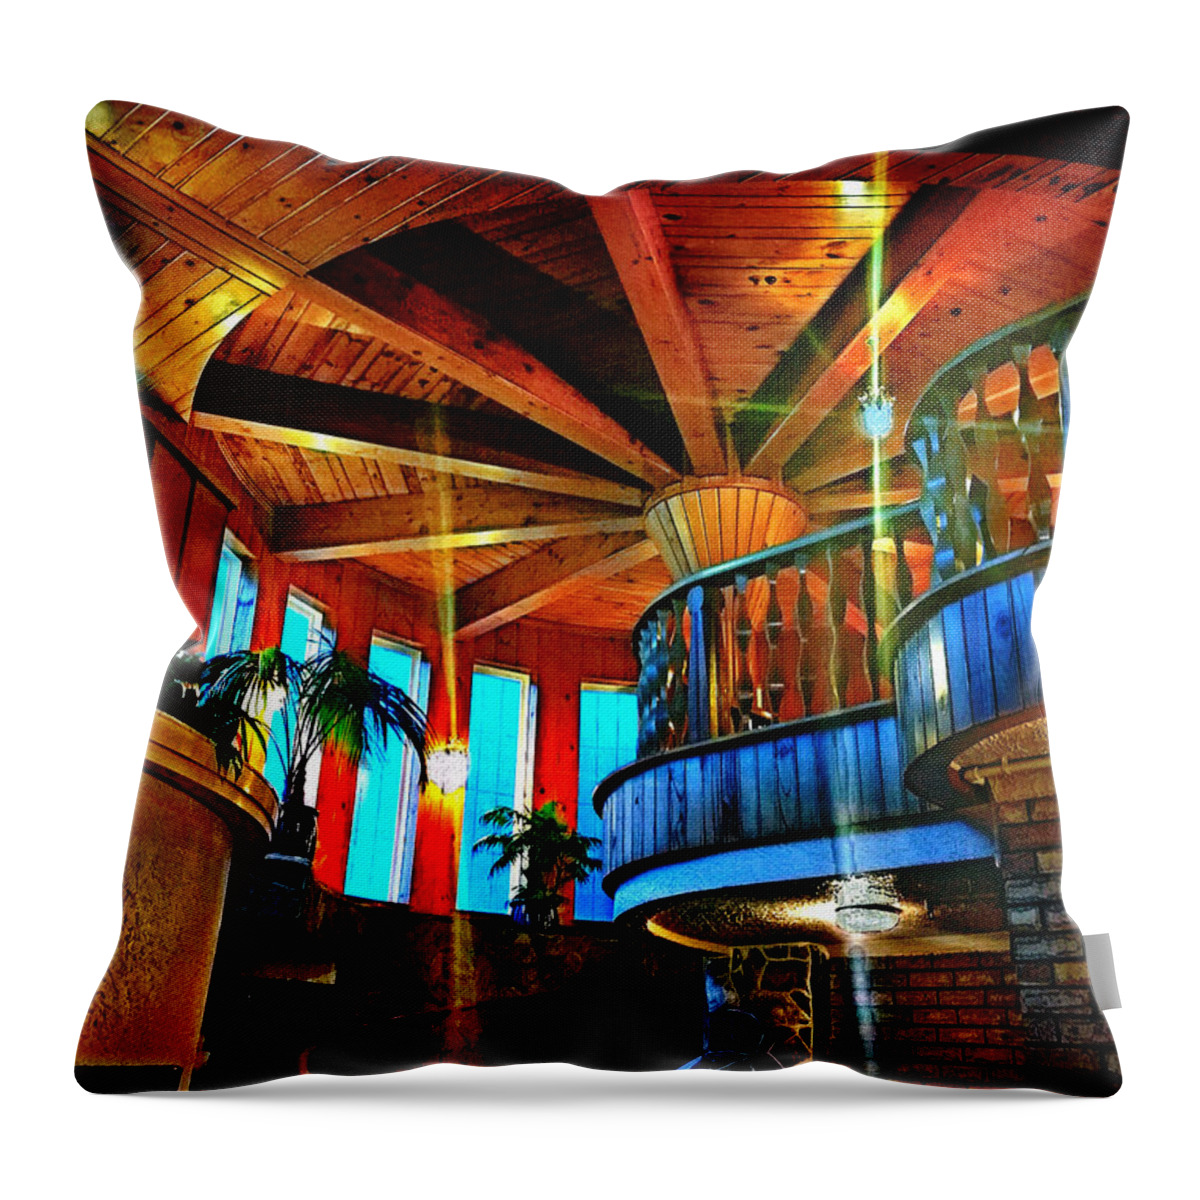 Wallaceville House Throw Pillow featuring the photograph Wallaceville House's Rustic Balcony by Kathy Kelly